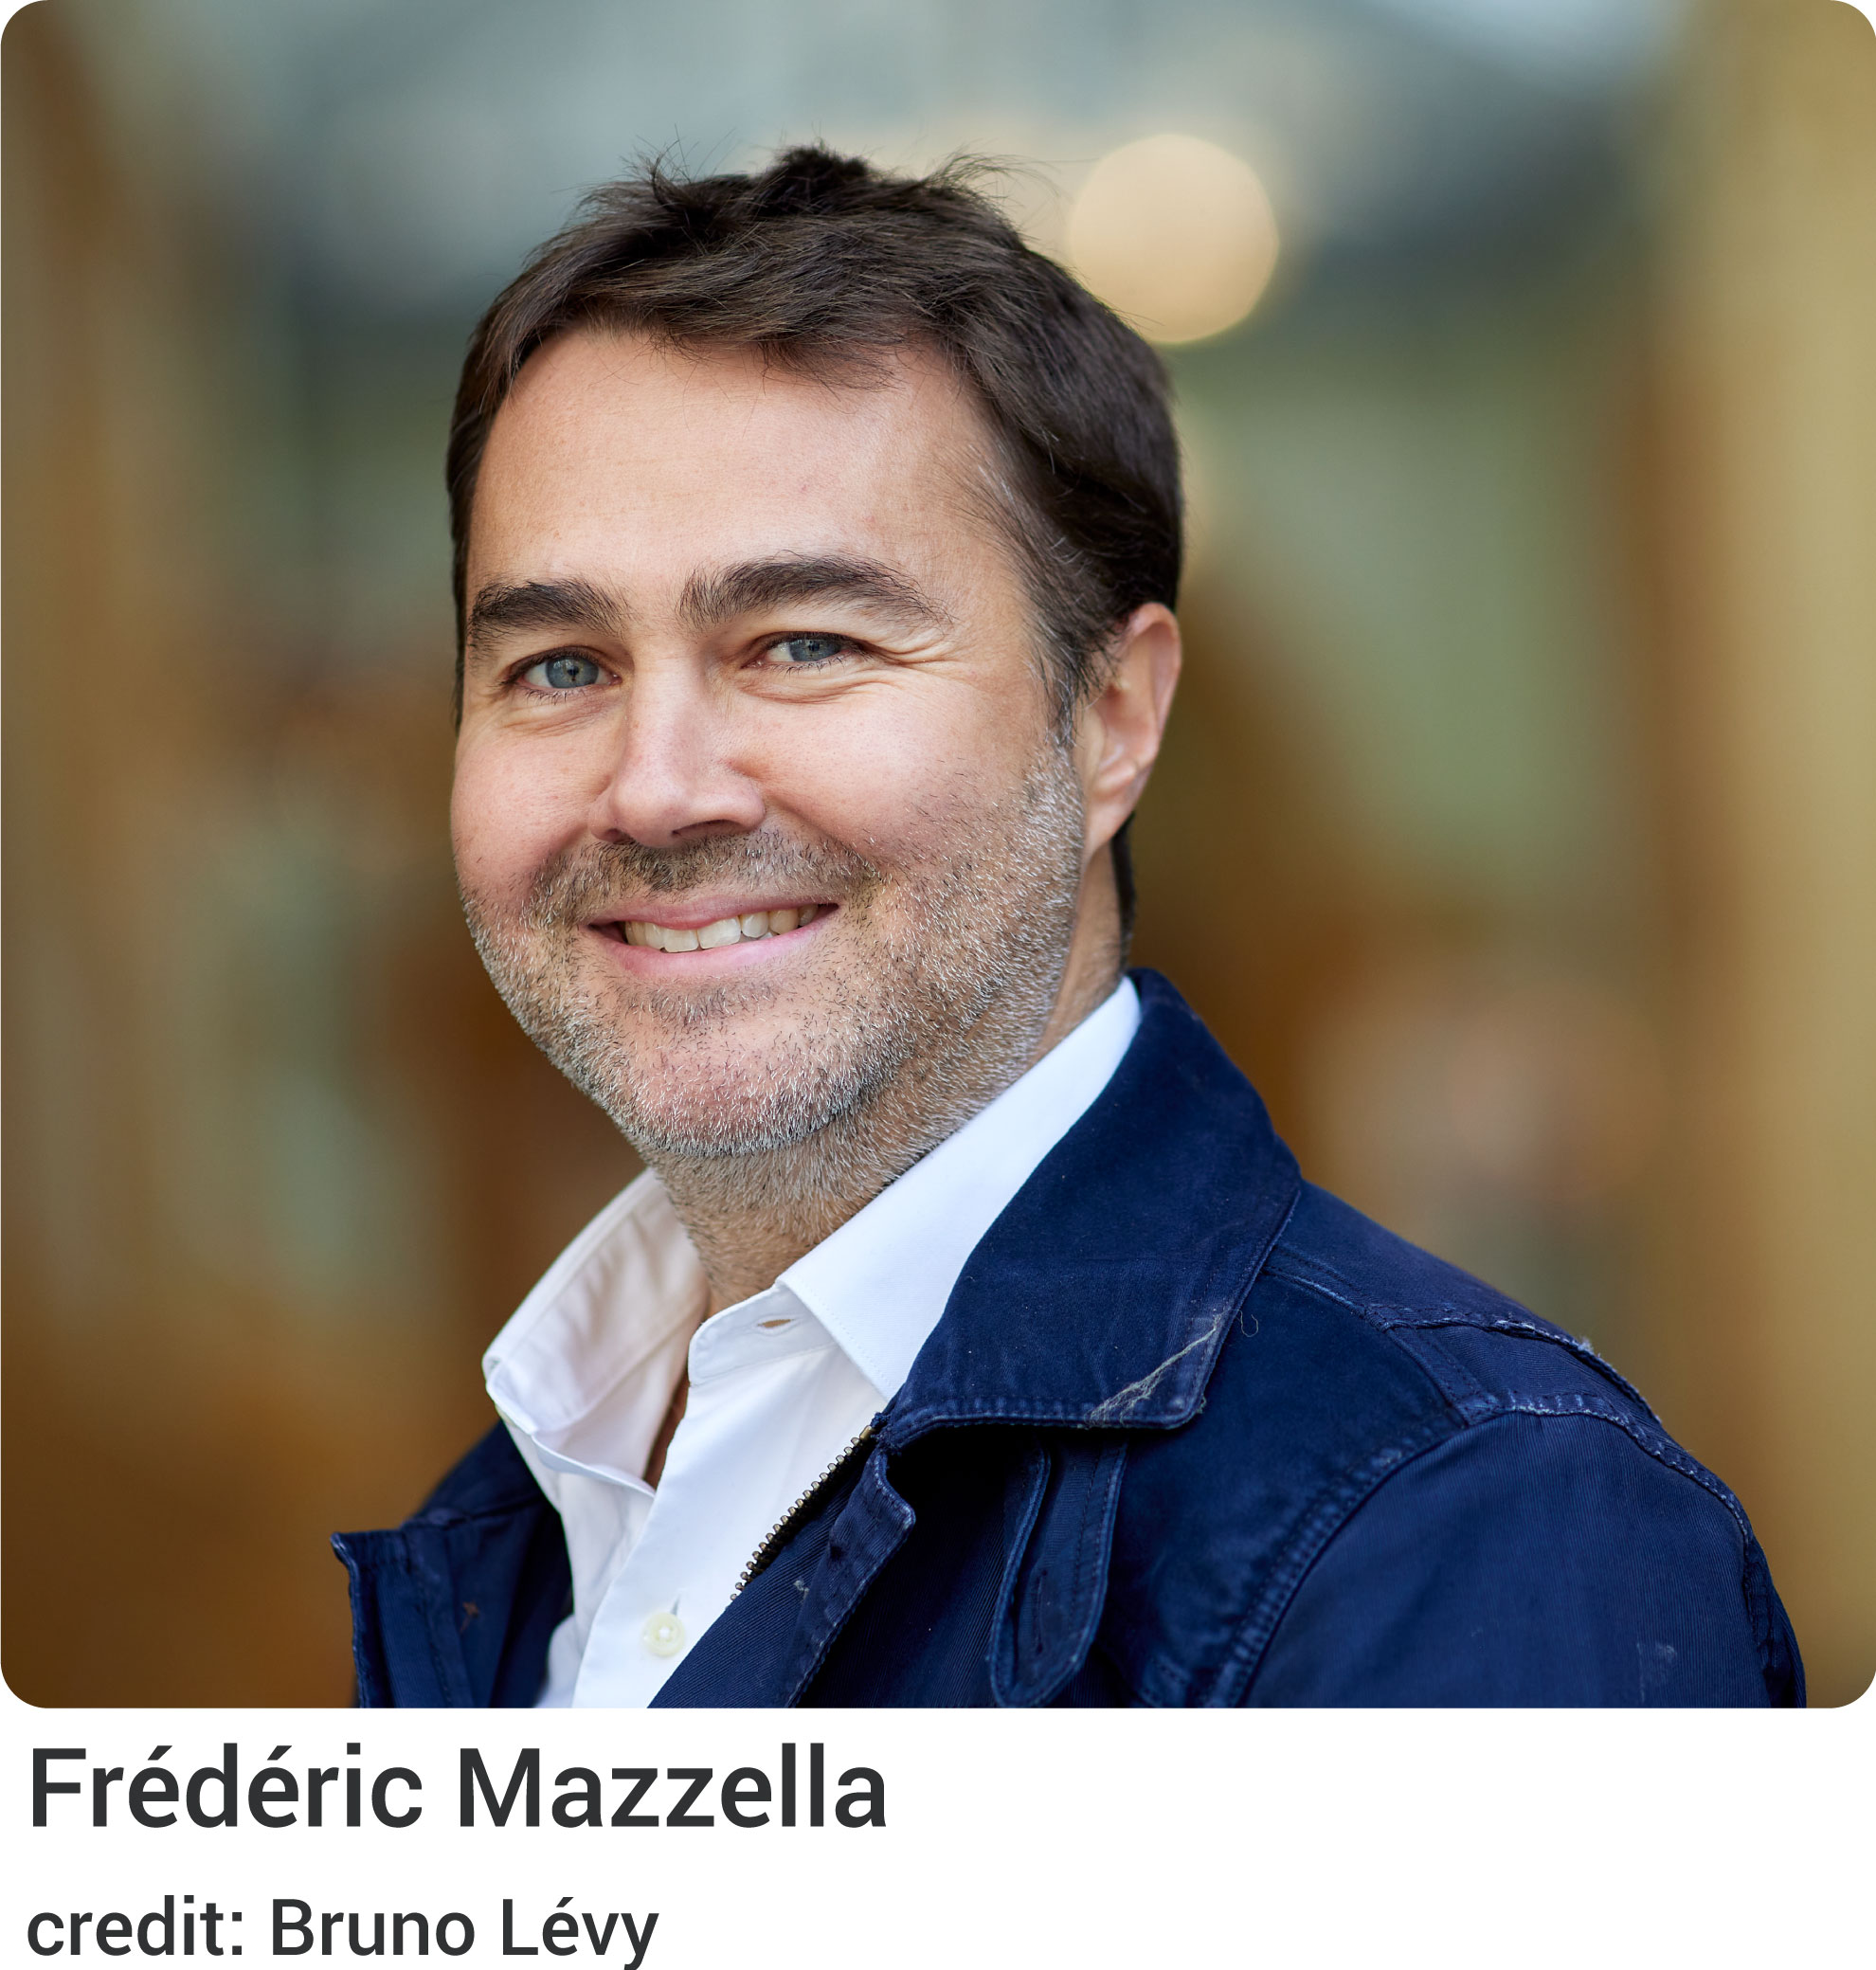 Image of Frédéric Mazzella